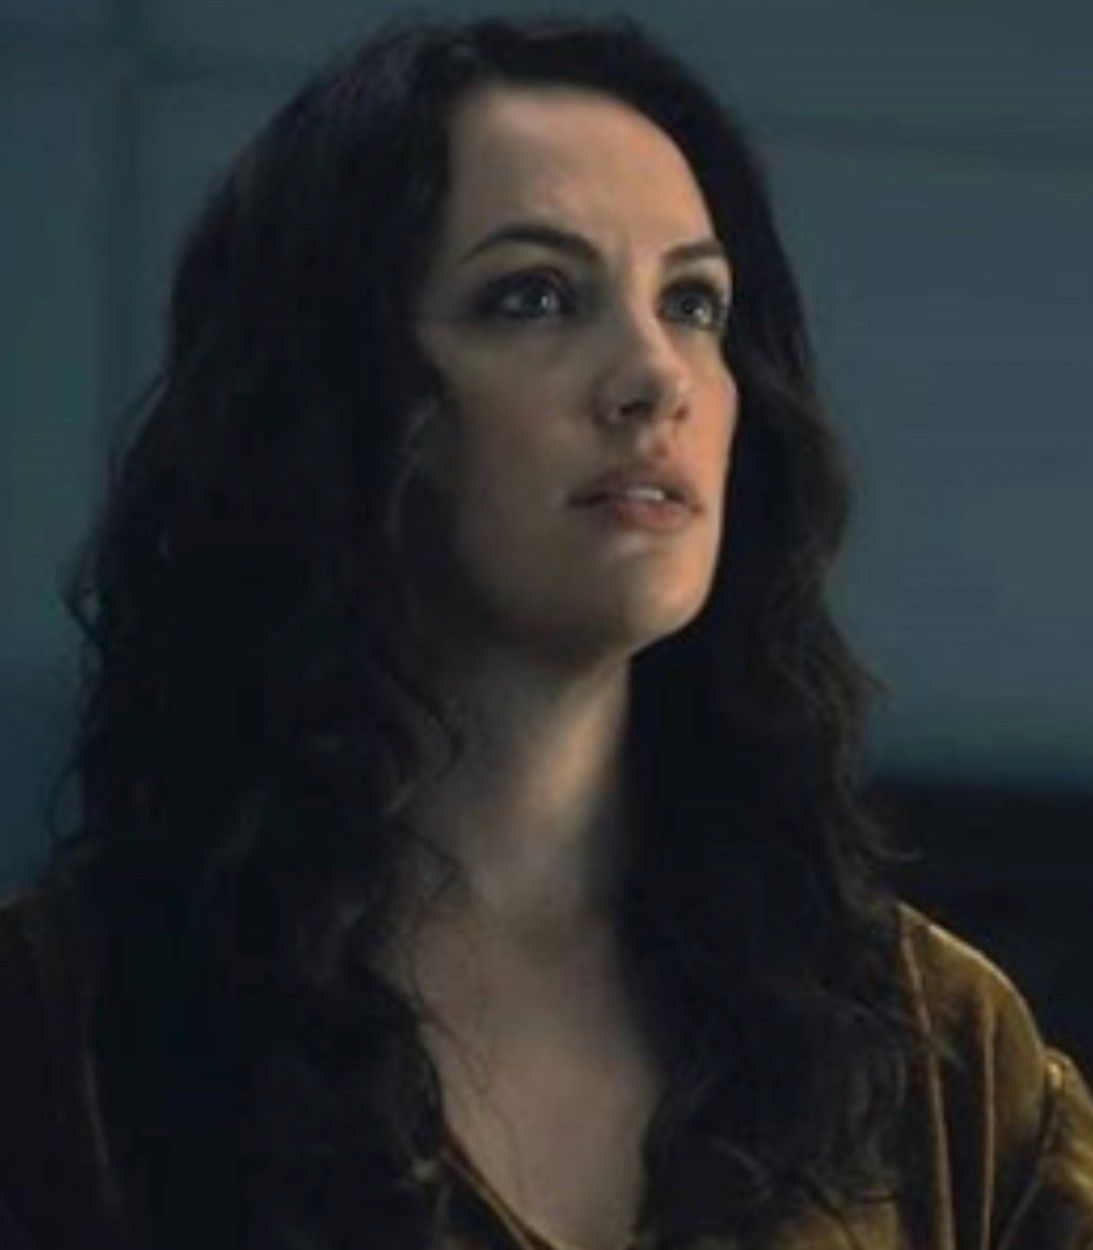 The Haunting Of Hill House Kate Siegel pic vertical